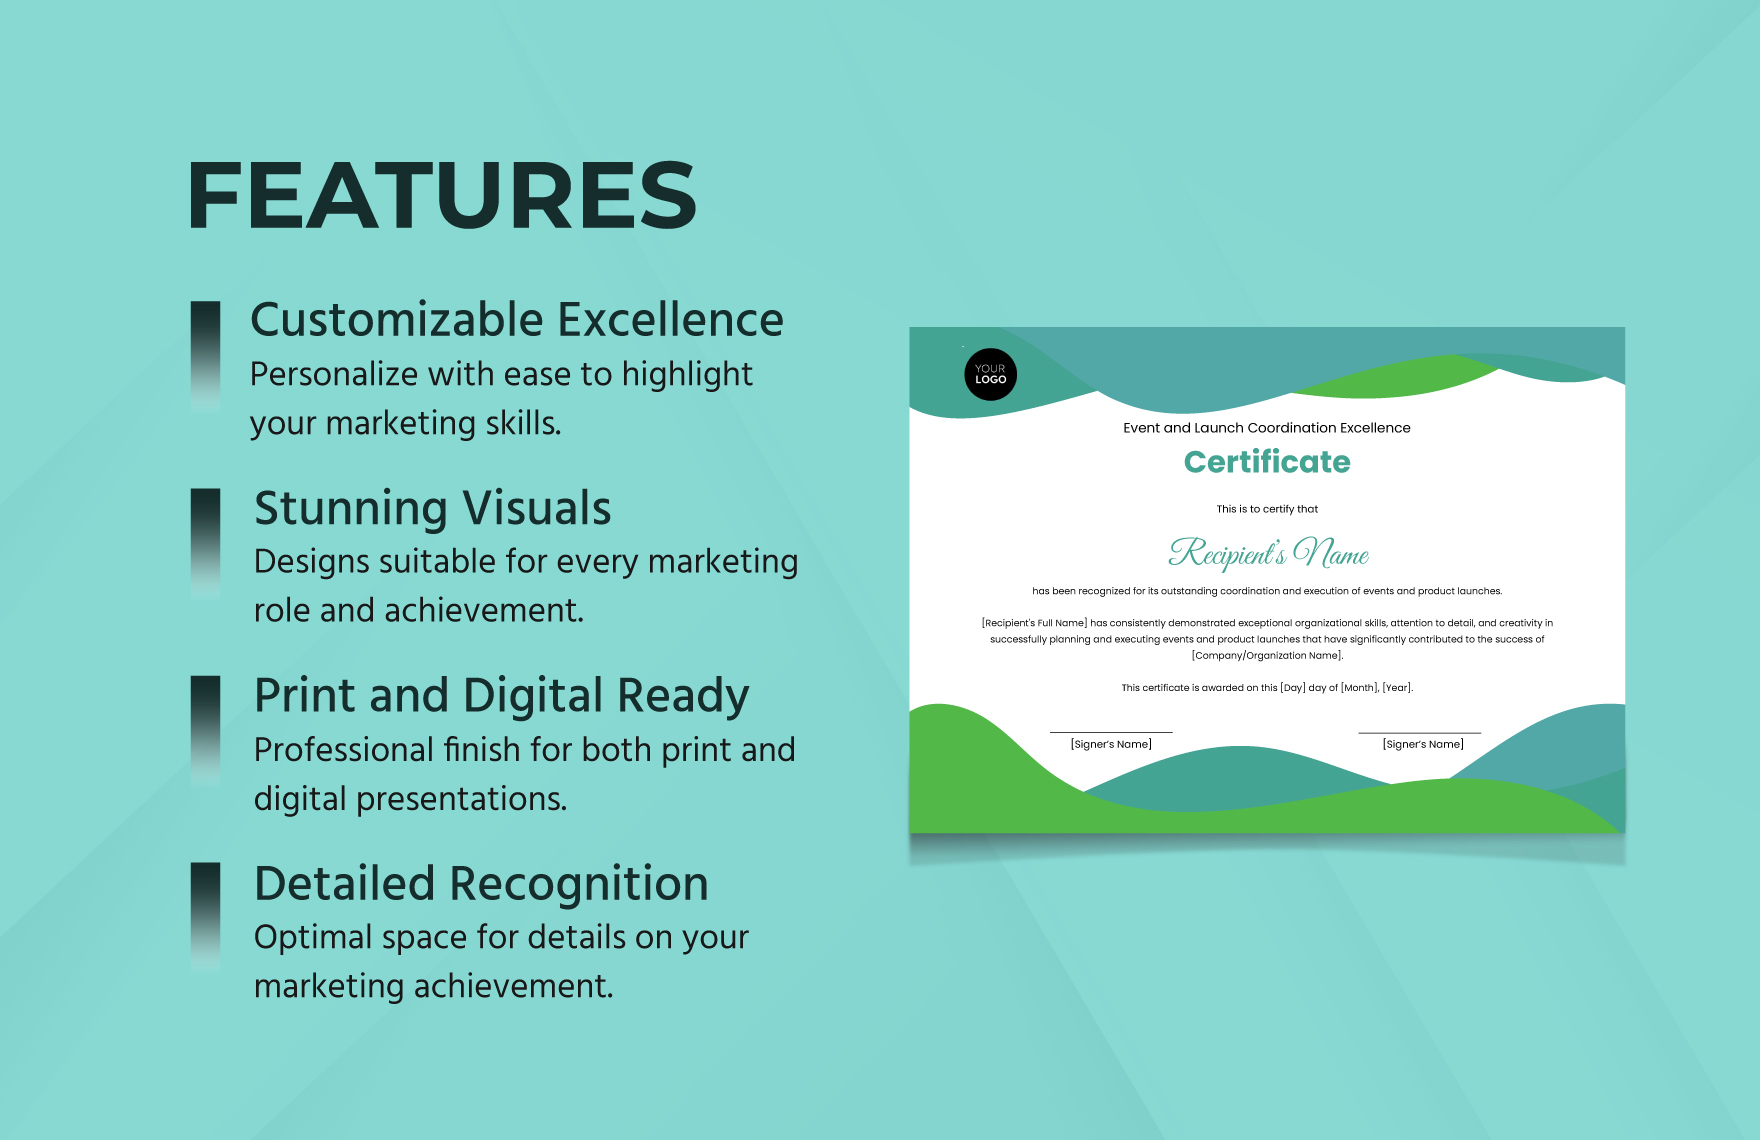 Event and Launch Coordination Excellence Certificate Template